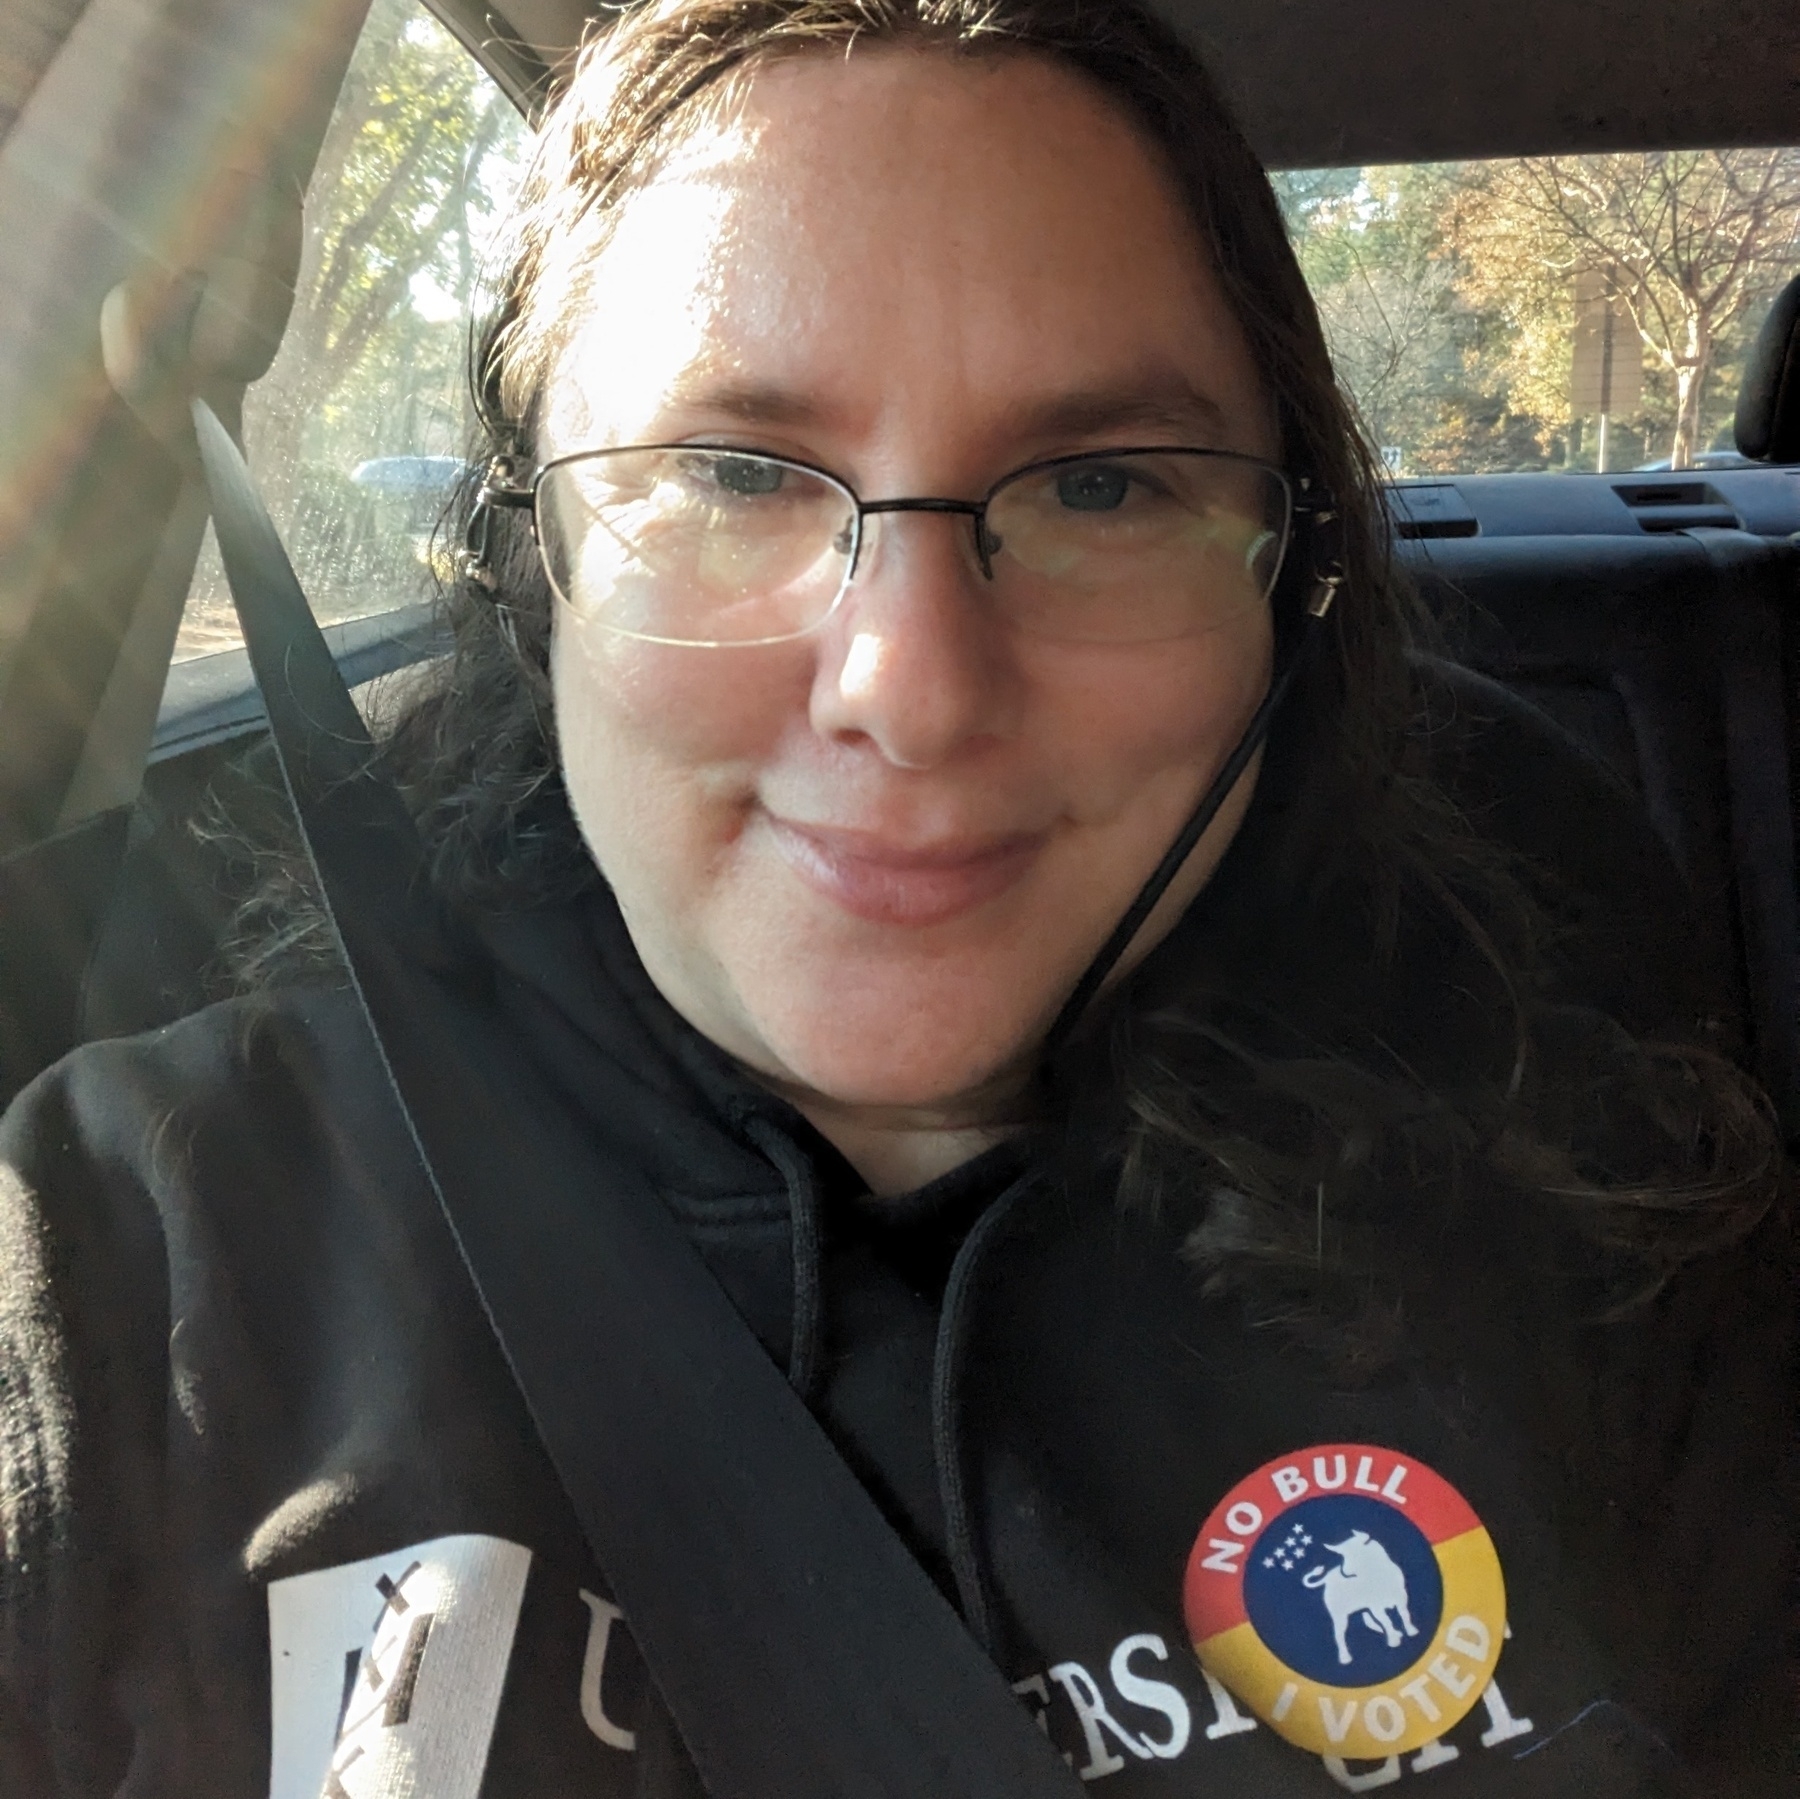 A white woman with dark hair, glasses, and blue eyes smiles. On her sweatshirt is a sticker that reads, "No Bull I Voted."